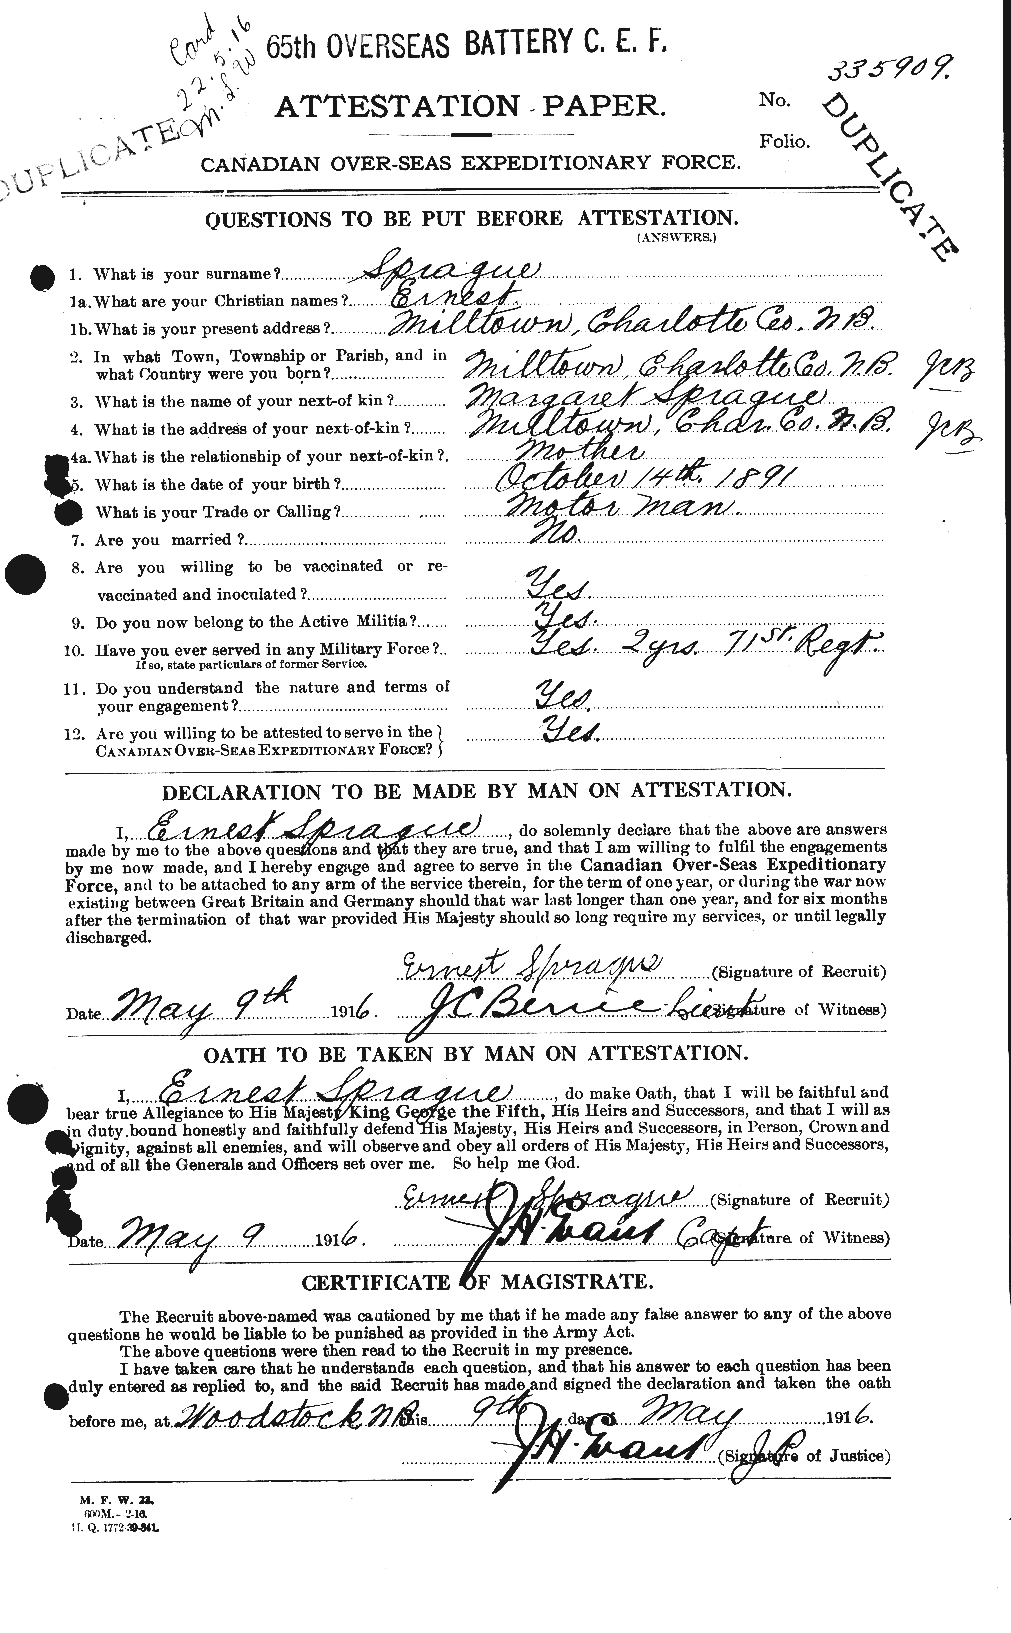 Personnel Records of the First World War - CEF 113139a